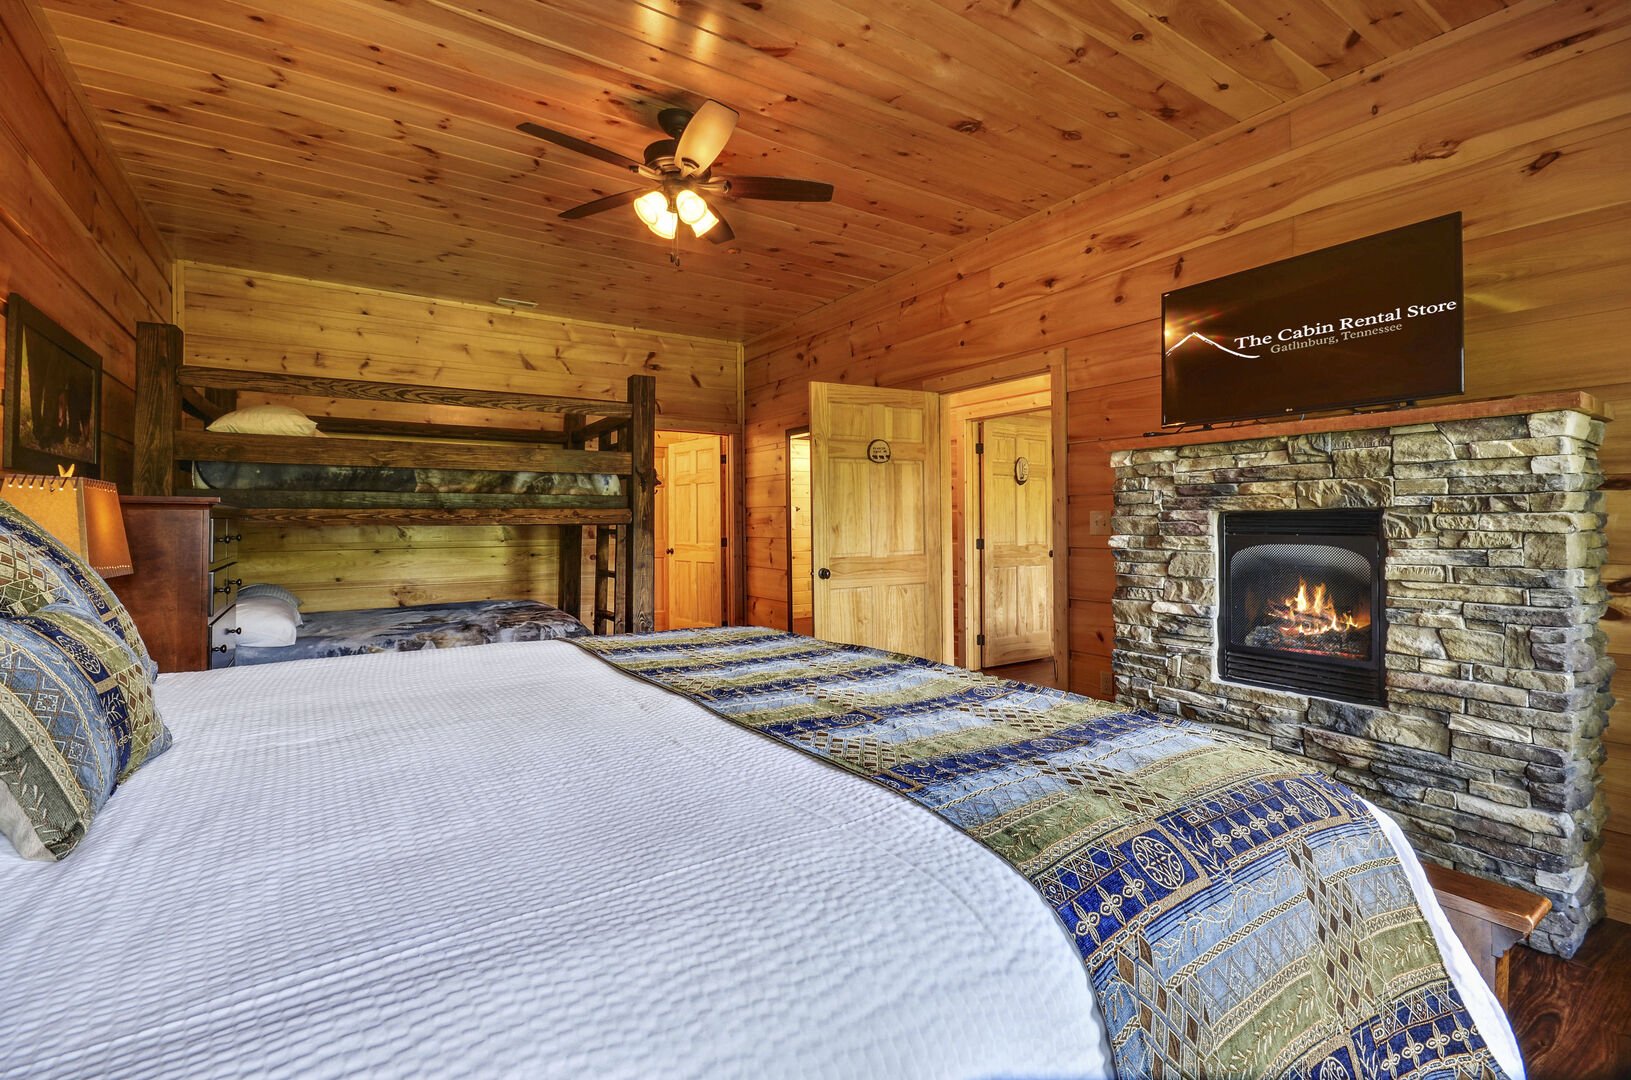 Guests Can Enjoy a Fire While Relaxing in Bed.